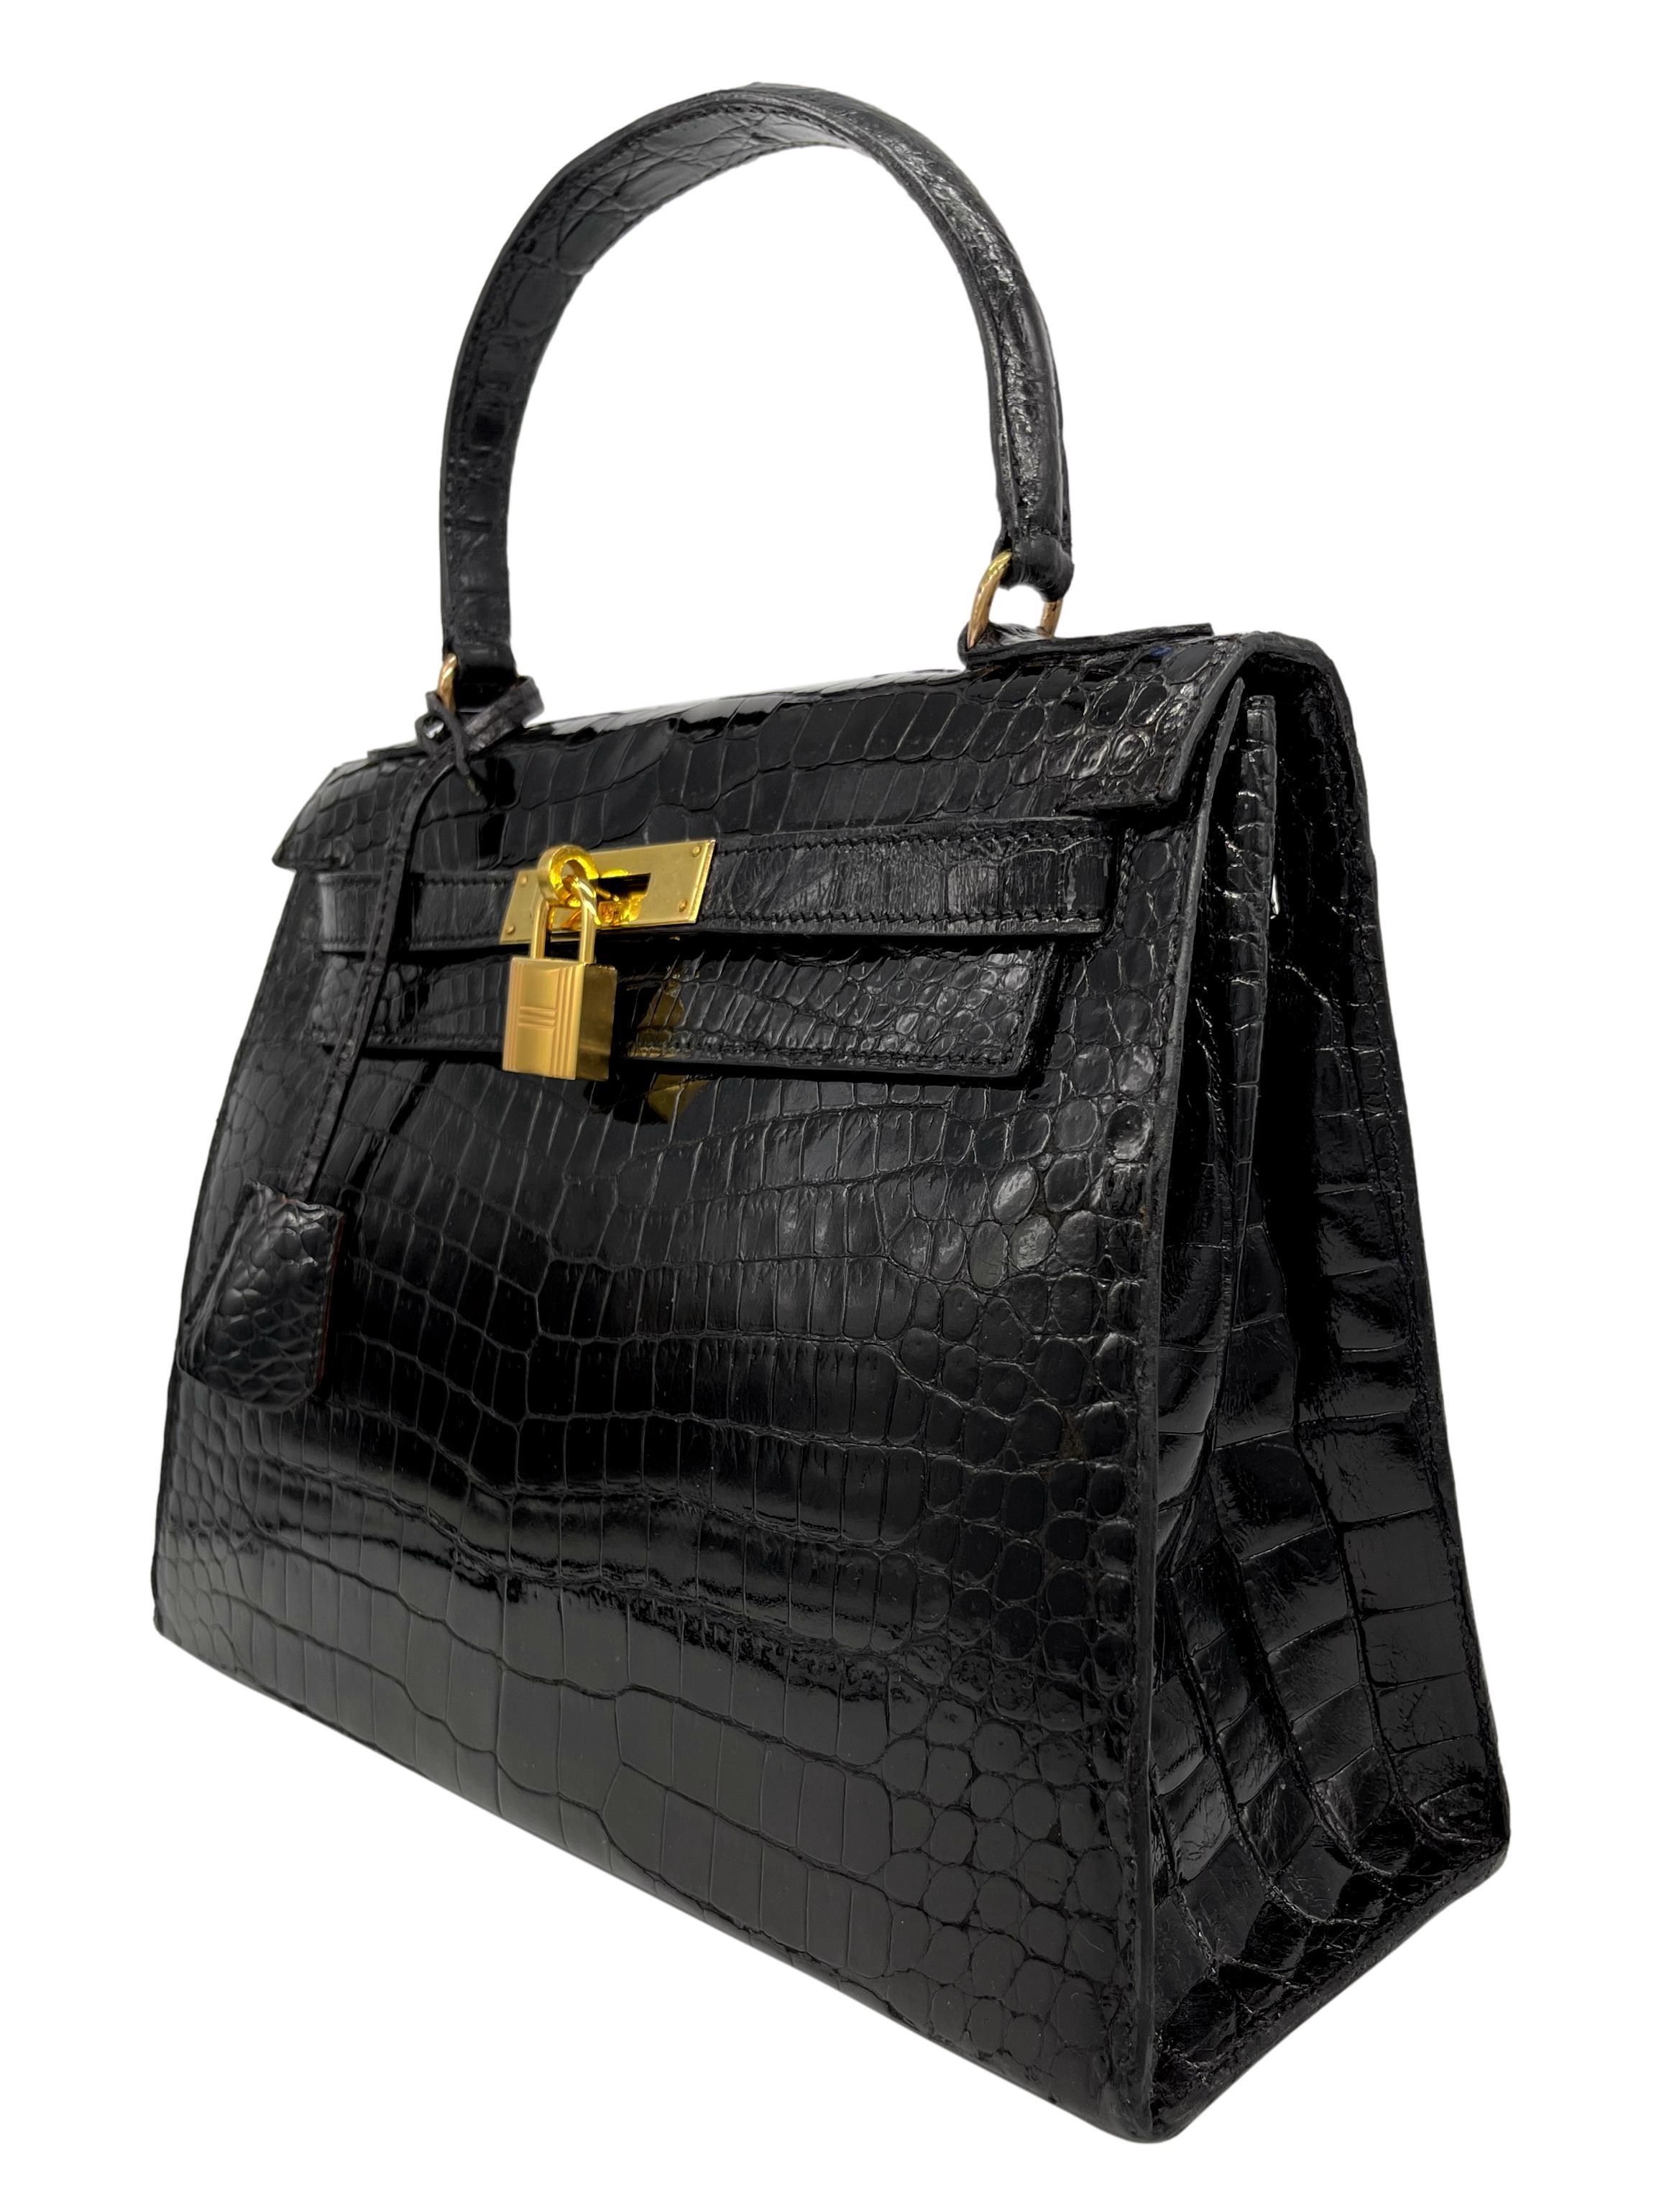 Hermès Shiny Black Porosus Crocodile Kelly Bag with Gold Hardware 28, 1940. In Good Condition For Sale In Banner Elk, NC